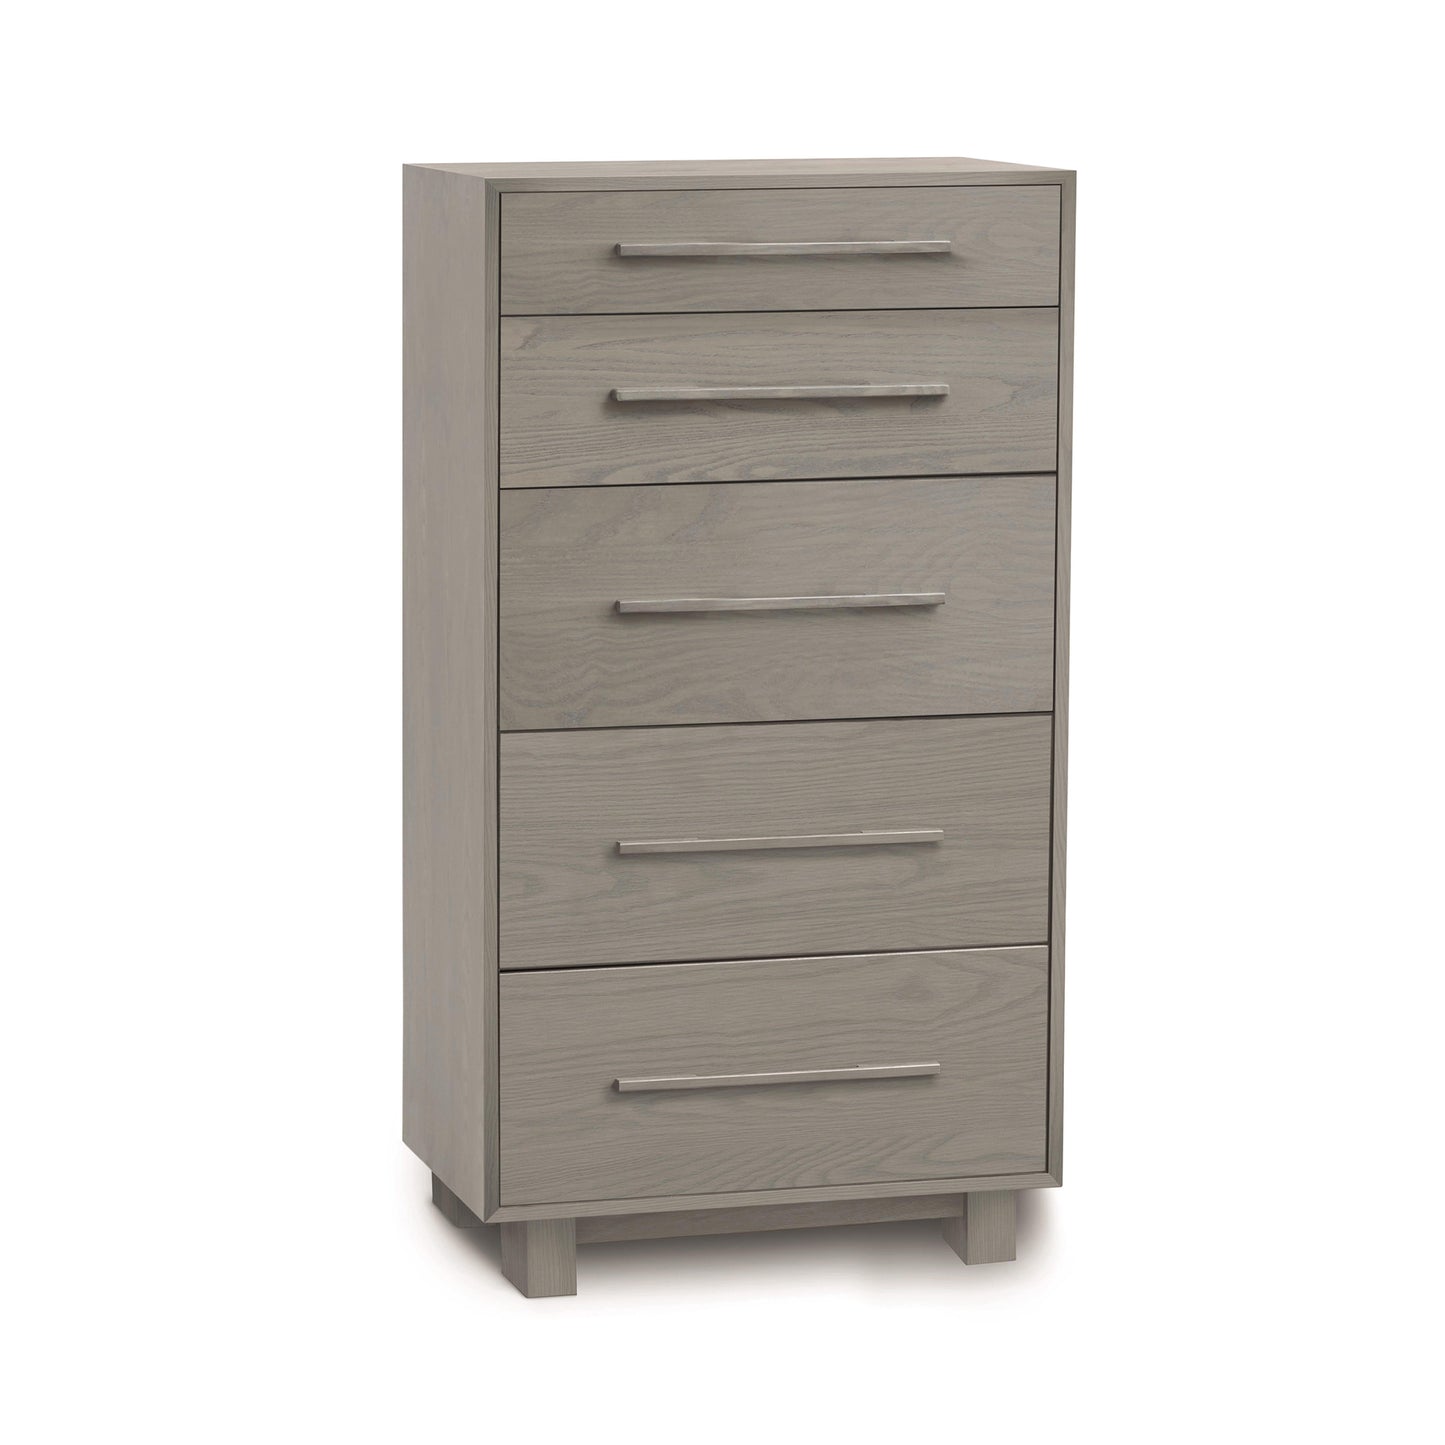 A modern Copeland Furniture Sloane 5-Drawer Narrow Chest, freestanding gray, on a white background.